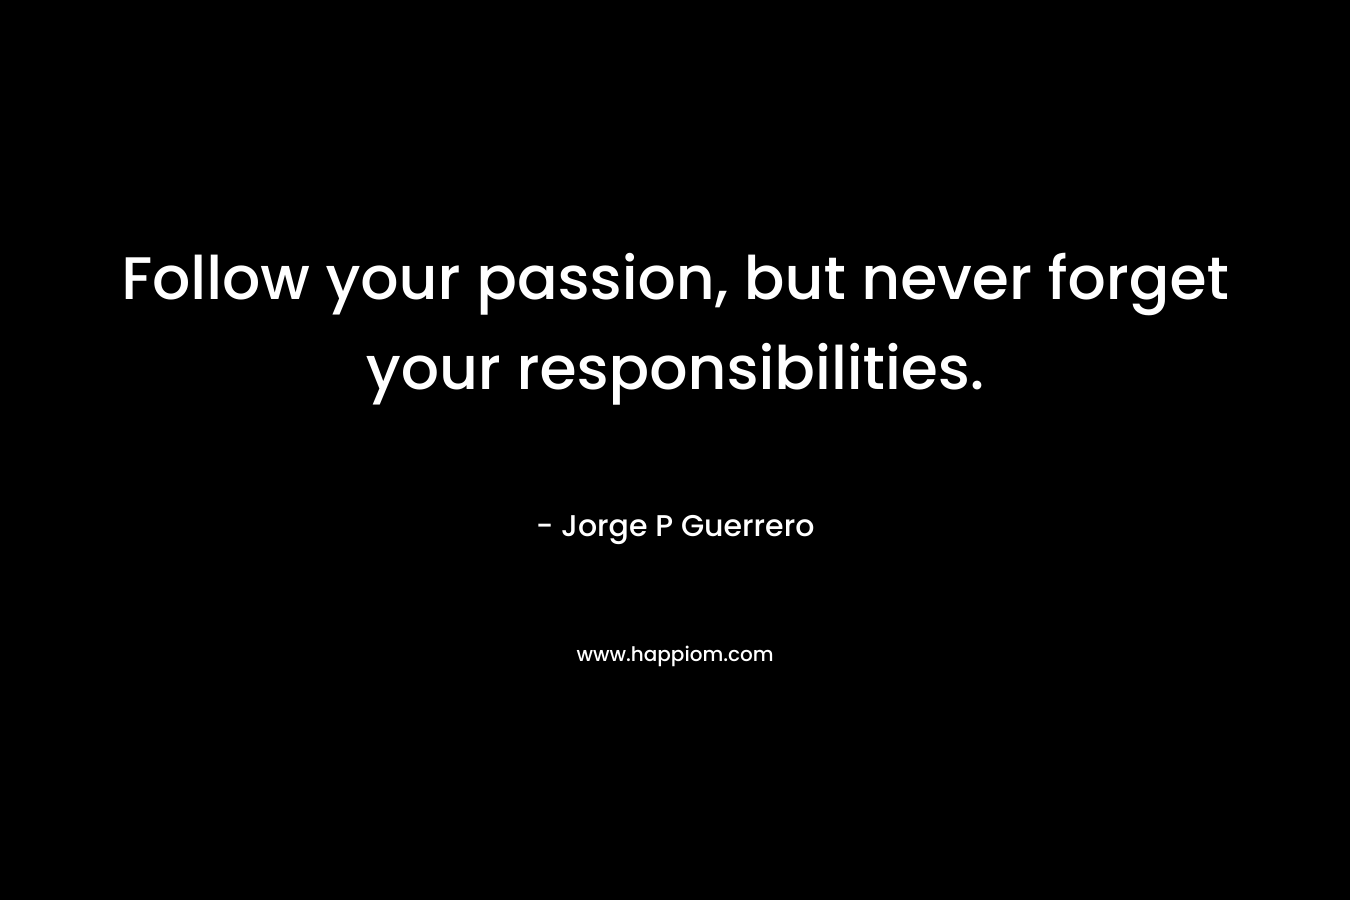 Follow your passion, but never forget your responsibilities.